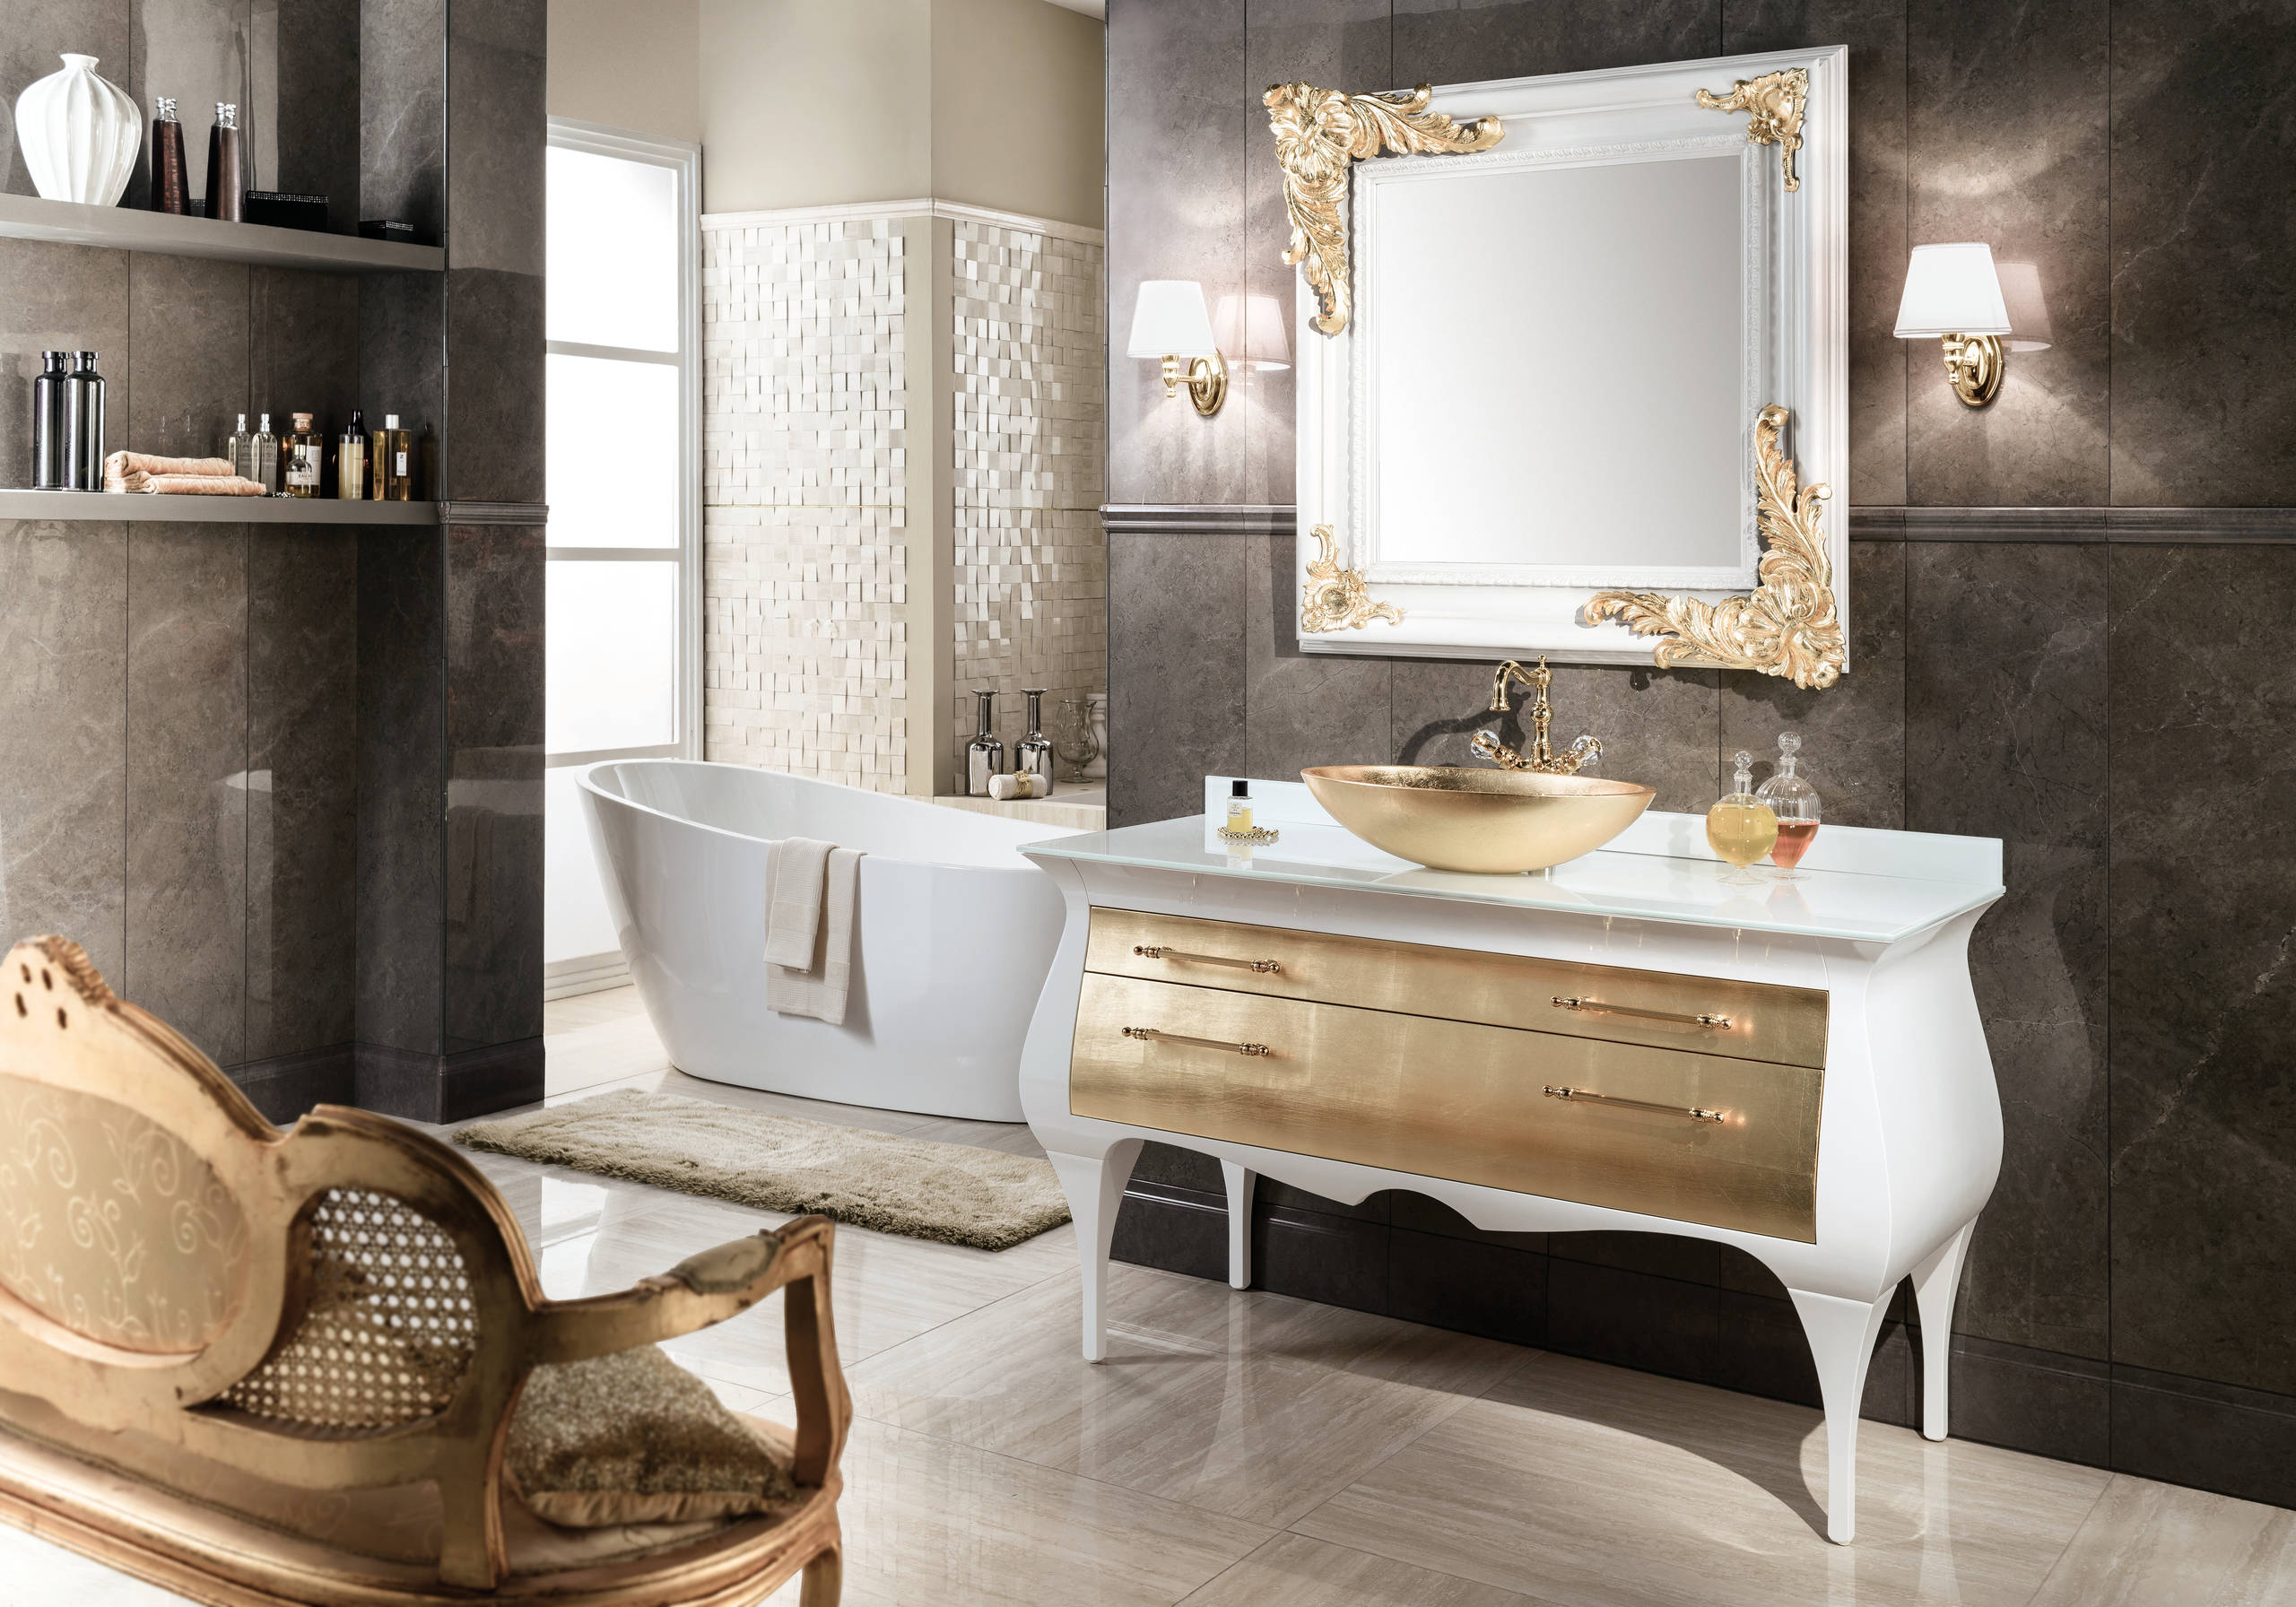 Gm Luxury Rialto 555 Master Bathroom Vanity Gold Leaf Cabinet With Vessel Sink Contemporary Bathroom Miami By Agm Home Store